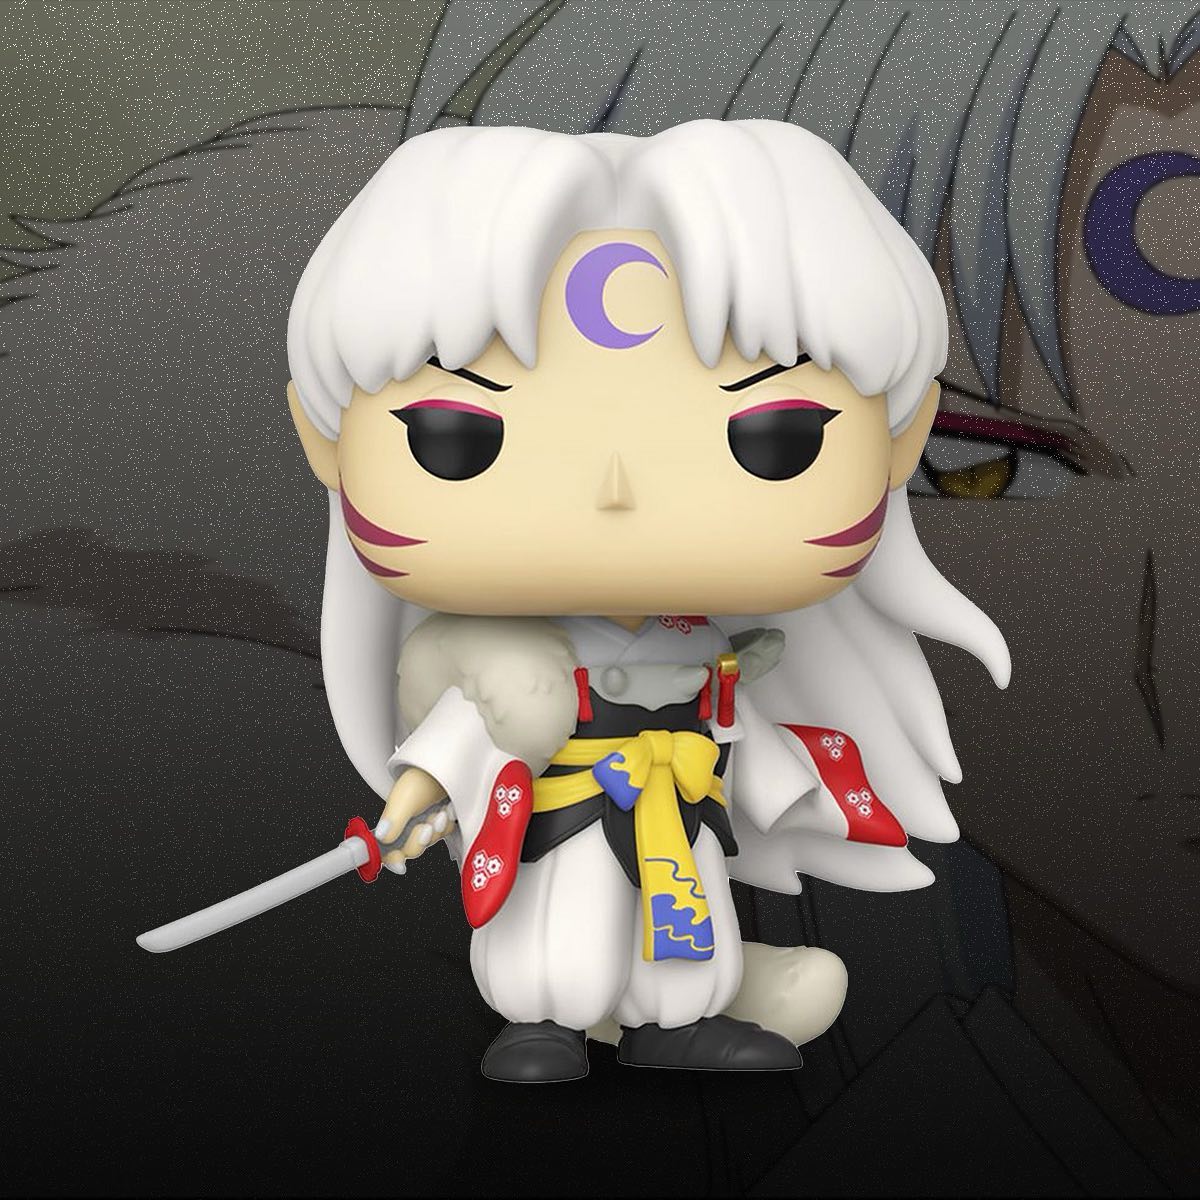 Relive the classic anime Inuyasha...